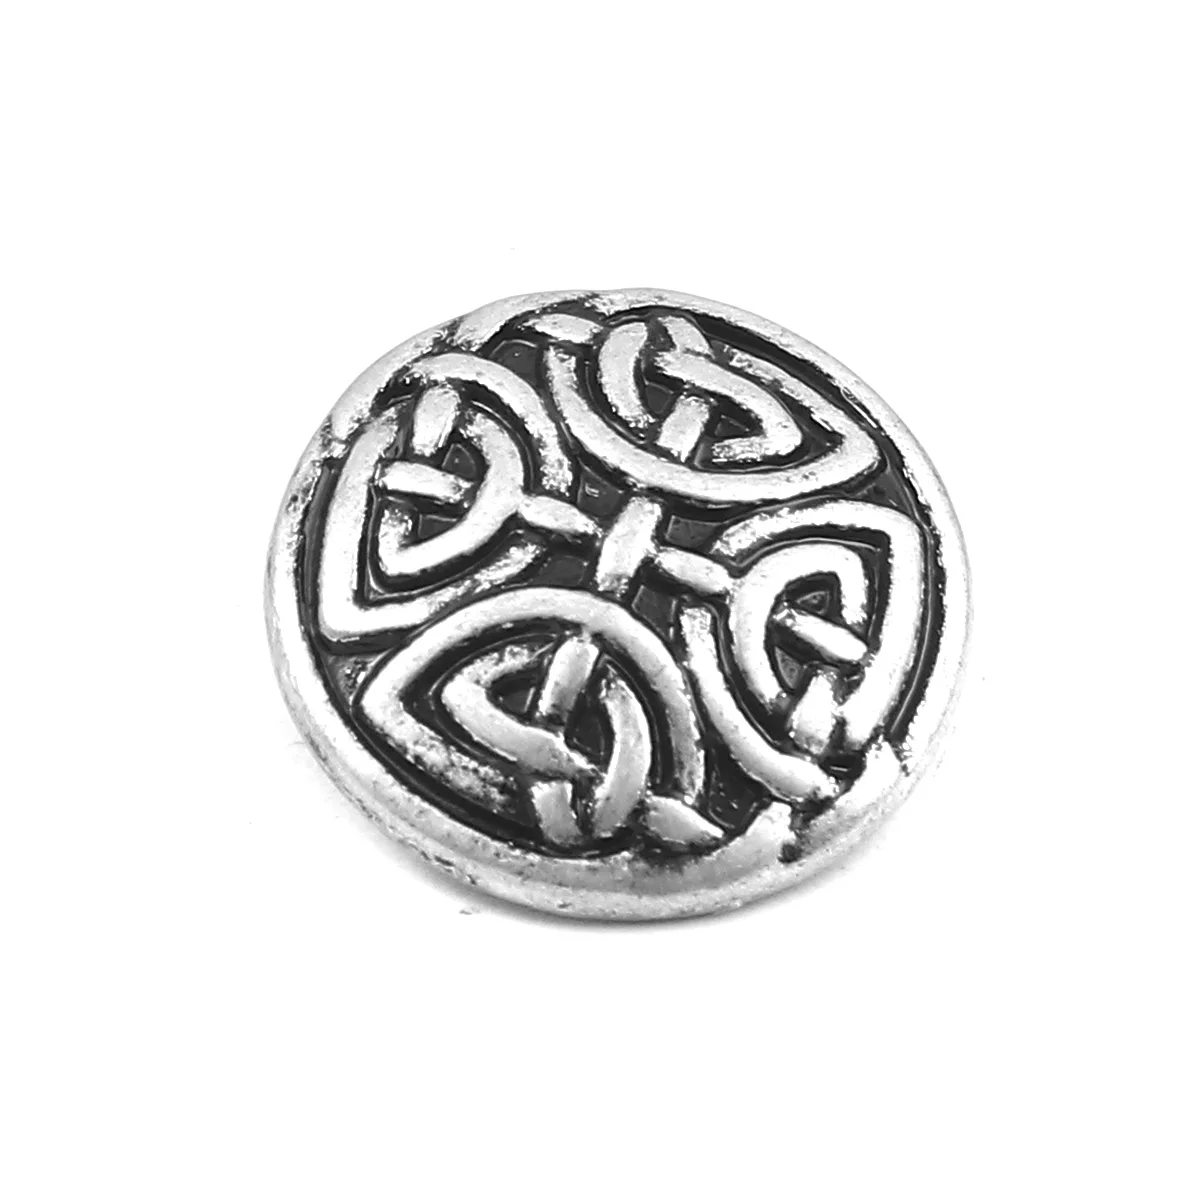 

10 PCs Zinc Based Alloy Shank Buttons Round Antique Silver Color Celtic Knot Carved Clothing DIY Sewing Accessories 17mm Dia